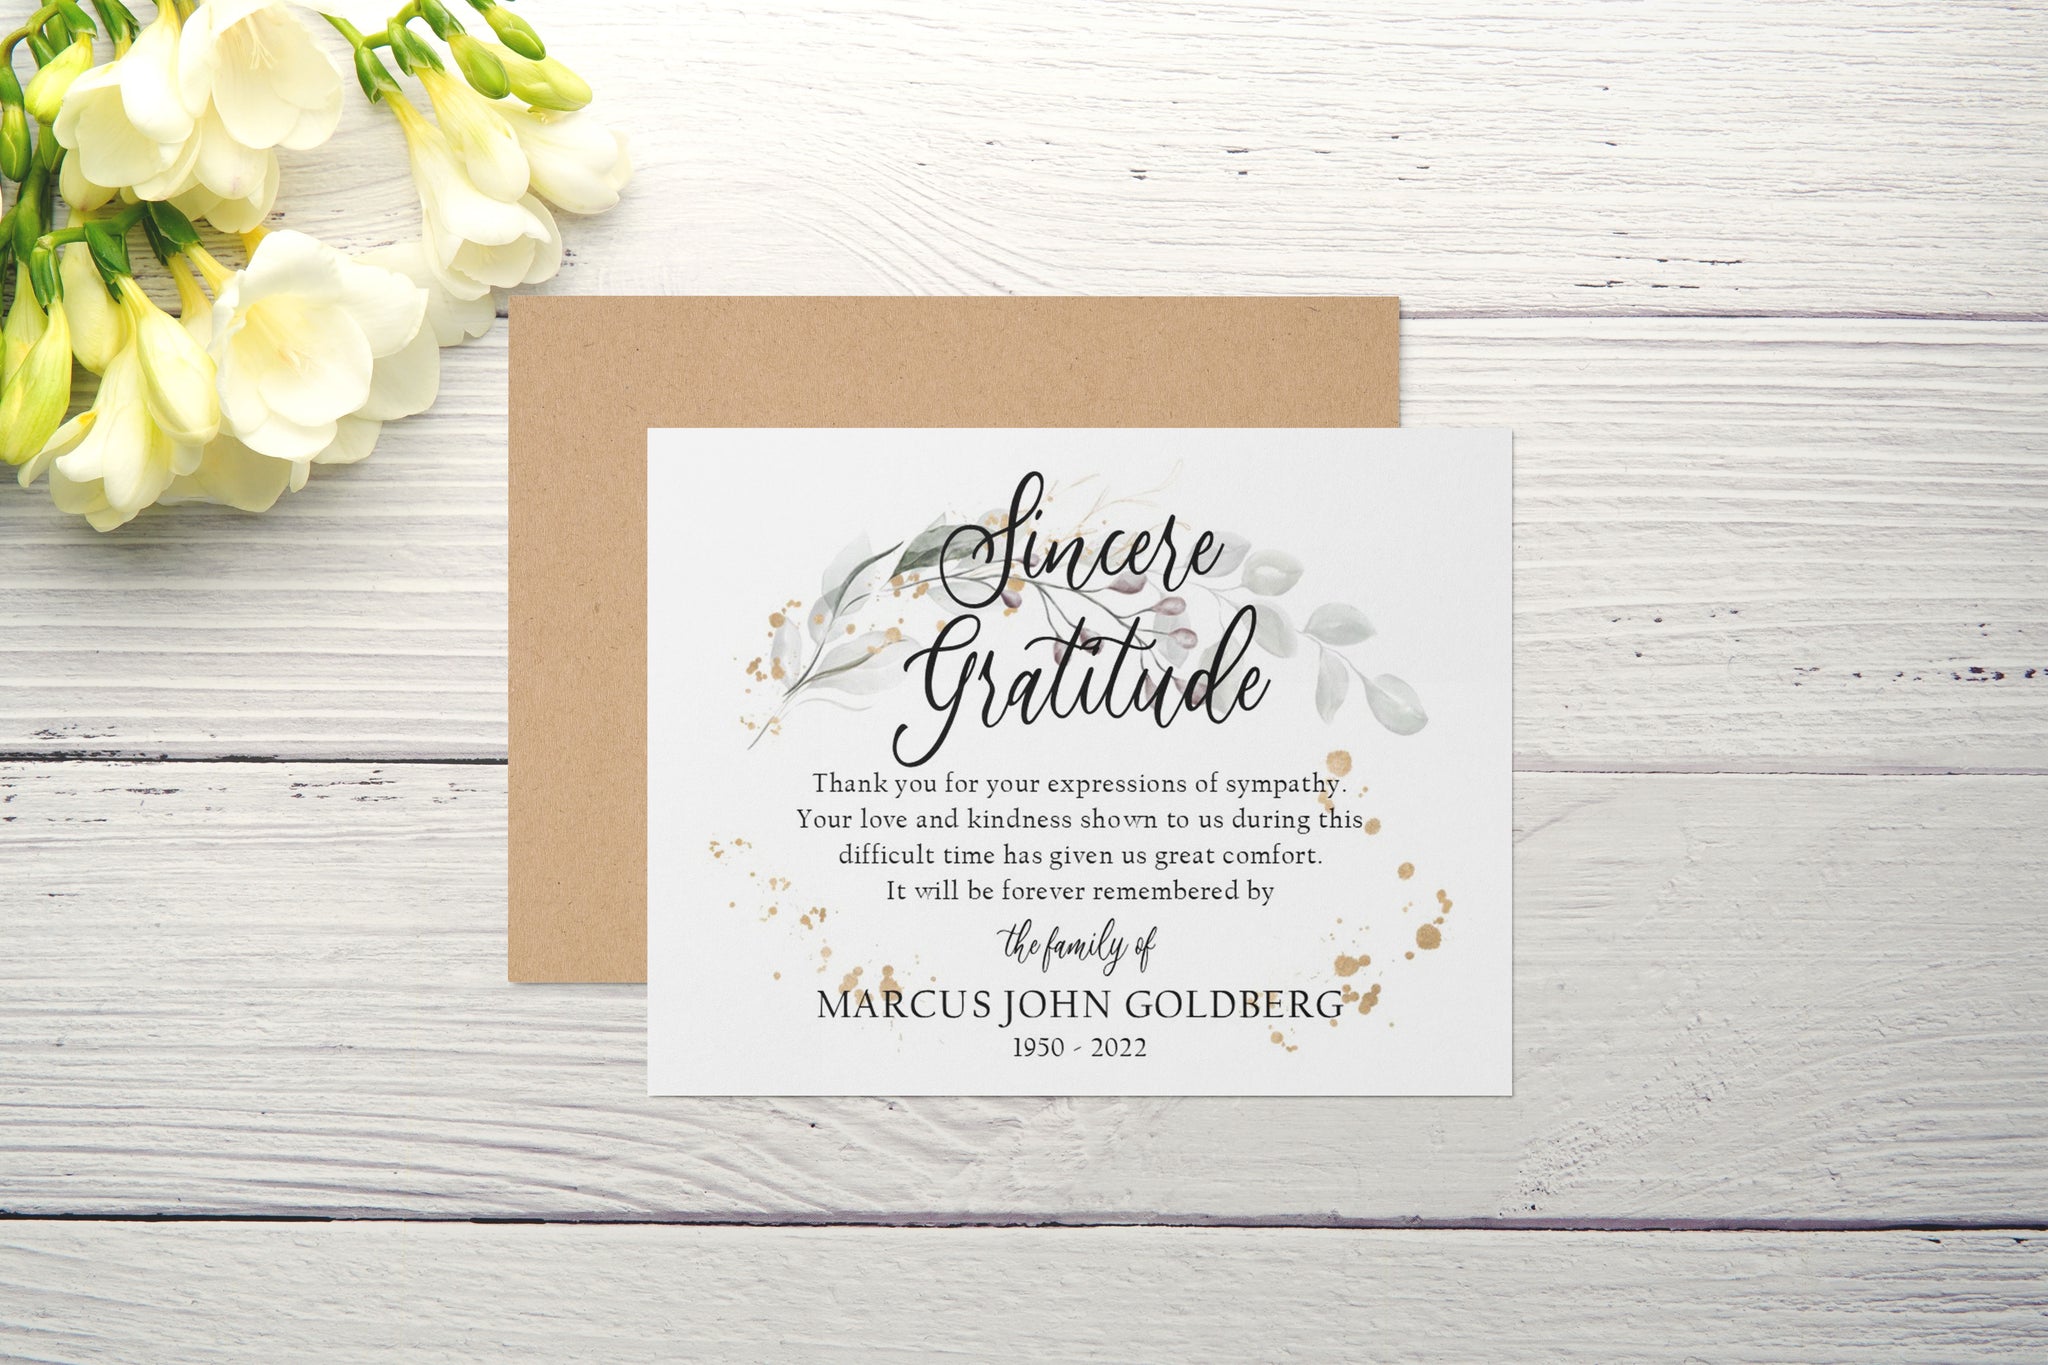 Personalized Funeral Acknowledgement Cards - Greenery Gold Dust